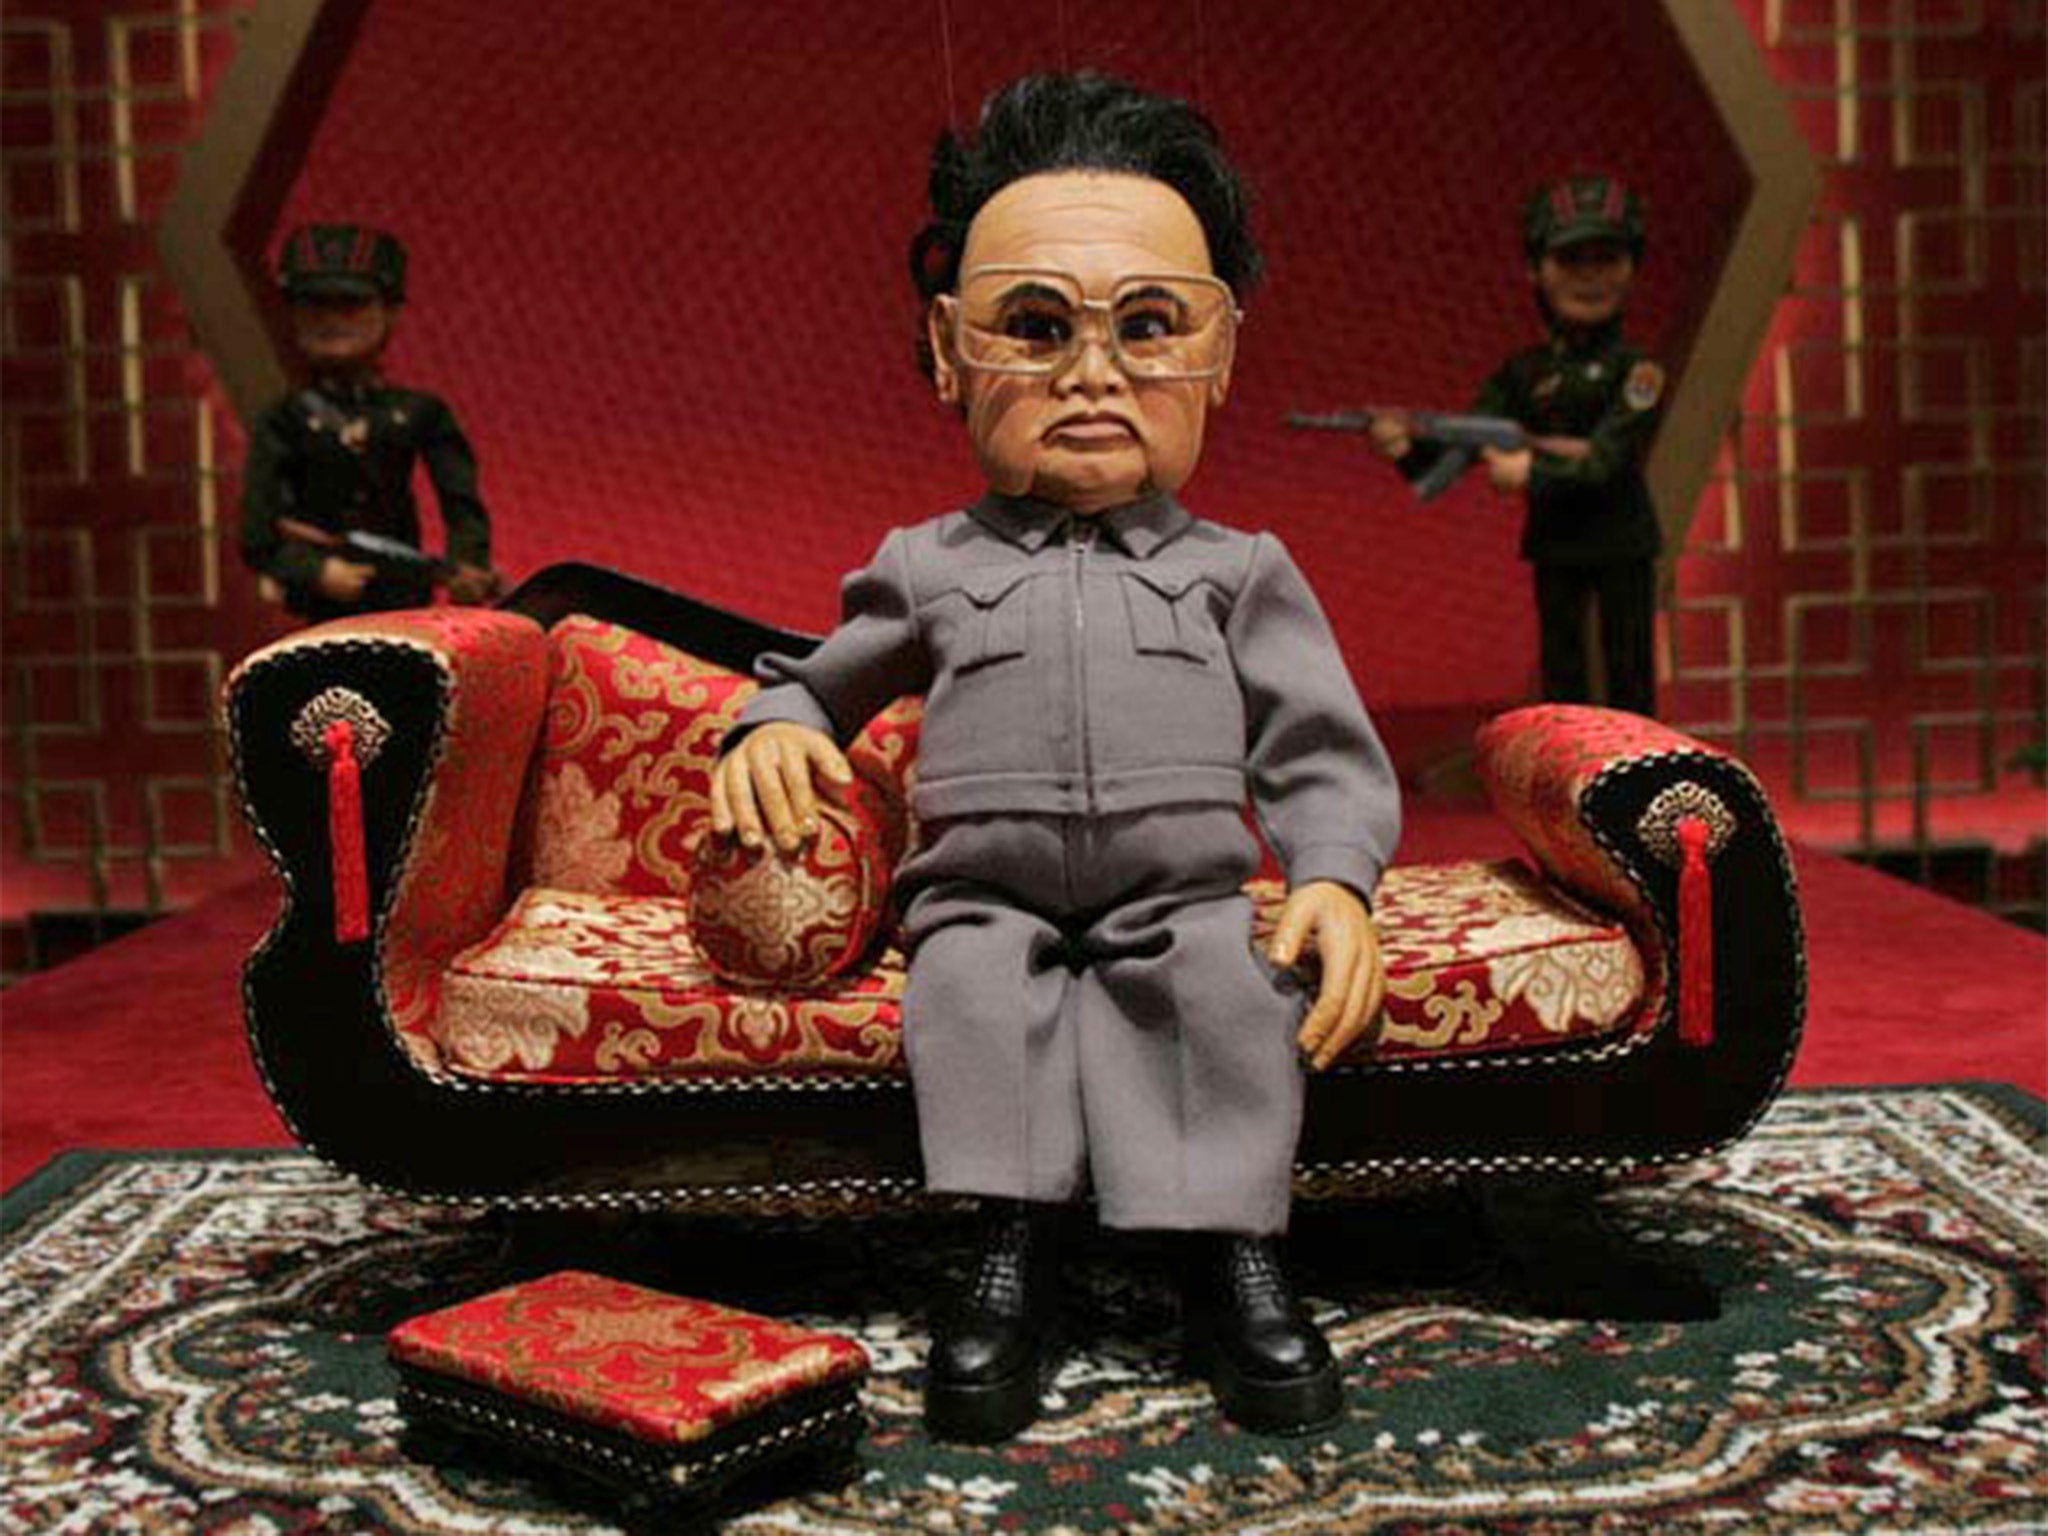 Kim Jong-il in ‘Team America: World Police’ which was emailed round the Tullett Prebon office